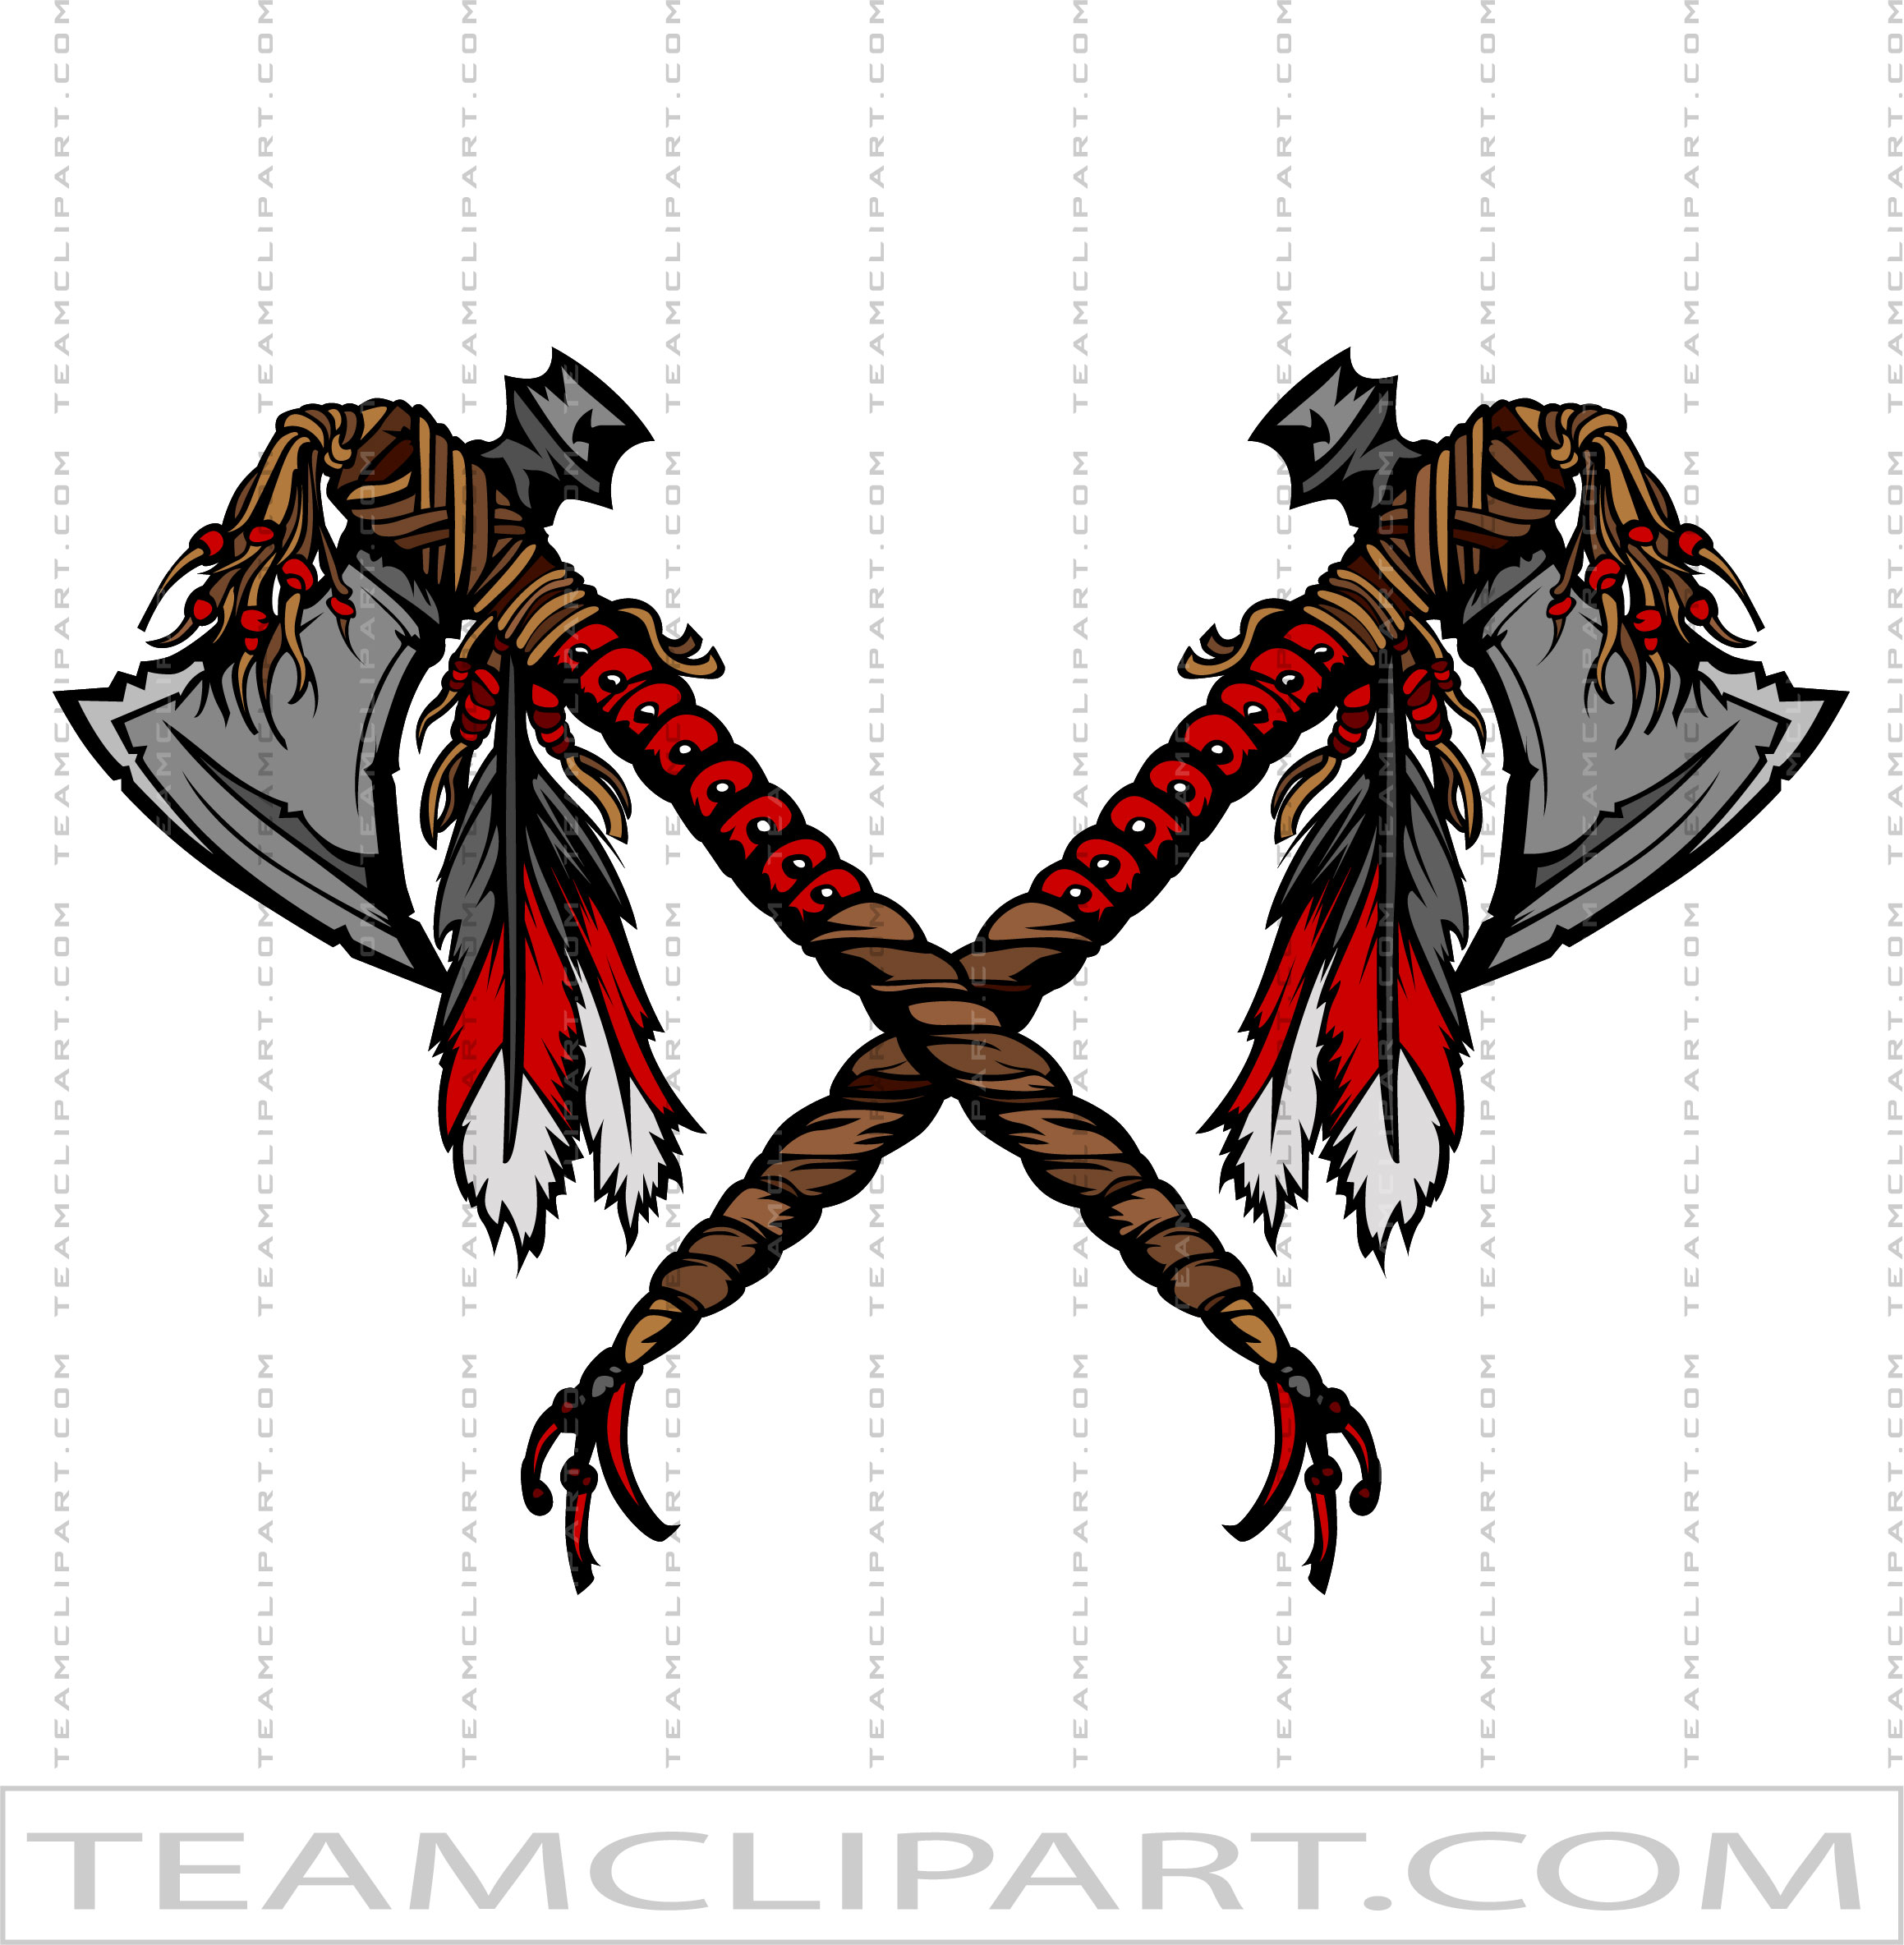 Clipart Tomahawk, Quality Clipart Images